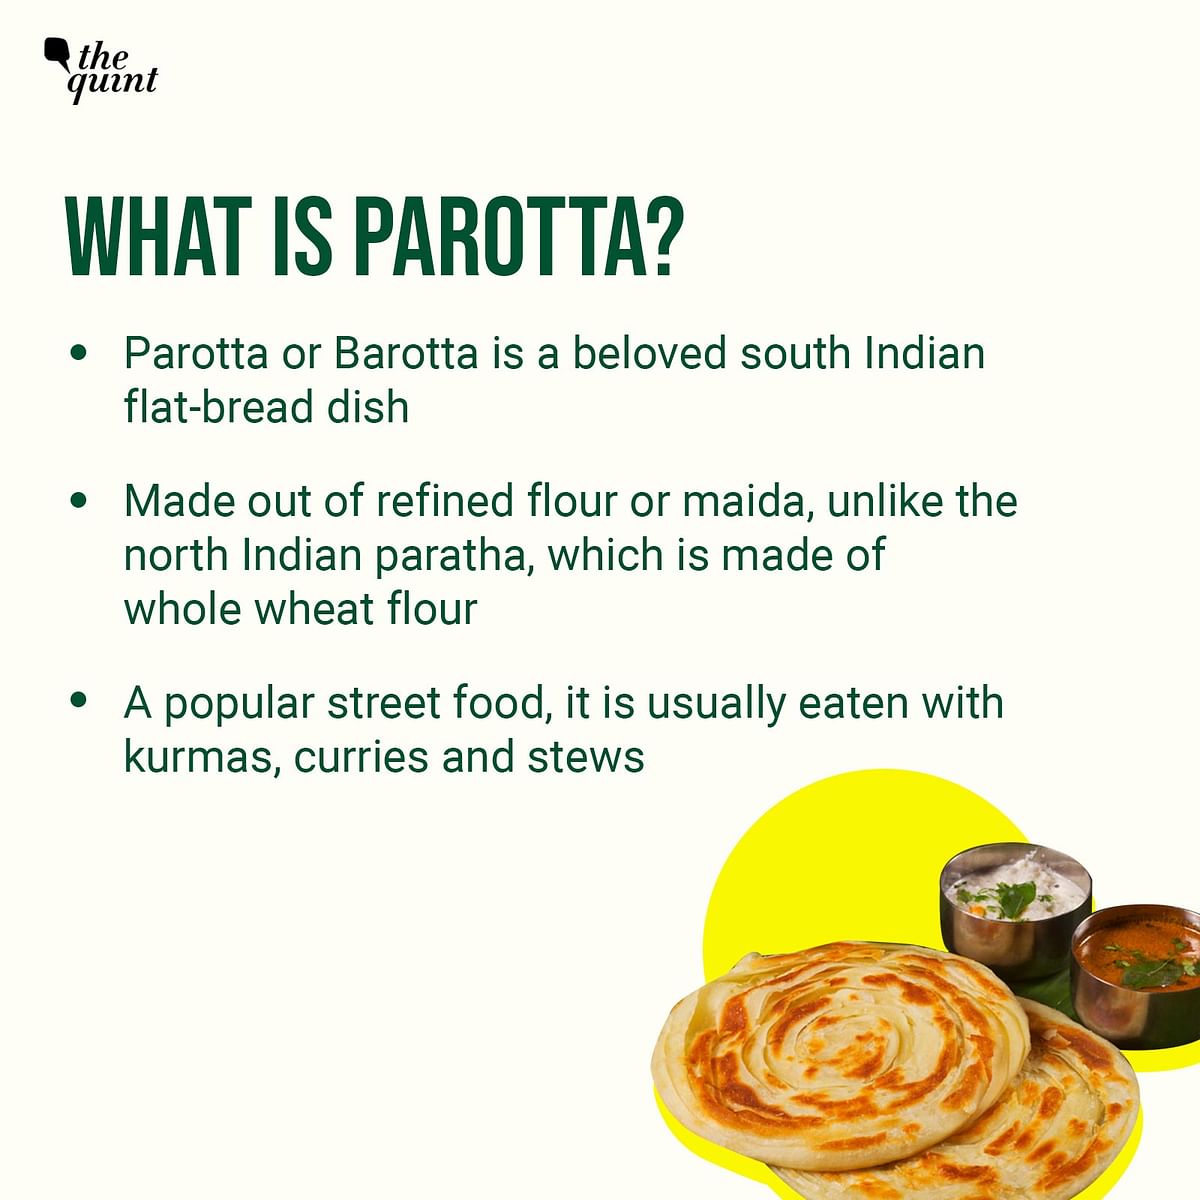 Why is the parotta being taxed more than roti, chappati and khakra? Here’s an explainer on parottas and taxes.